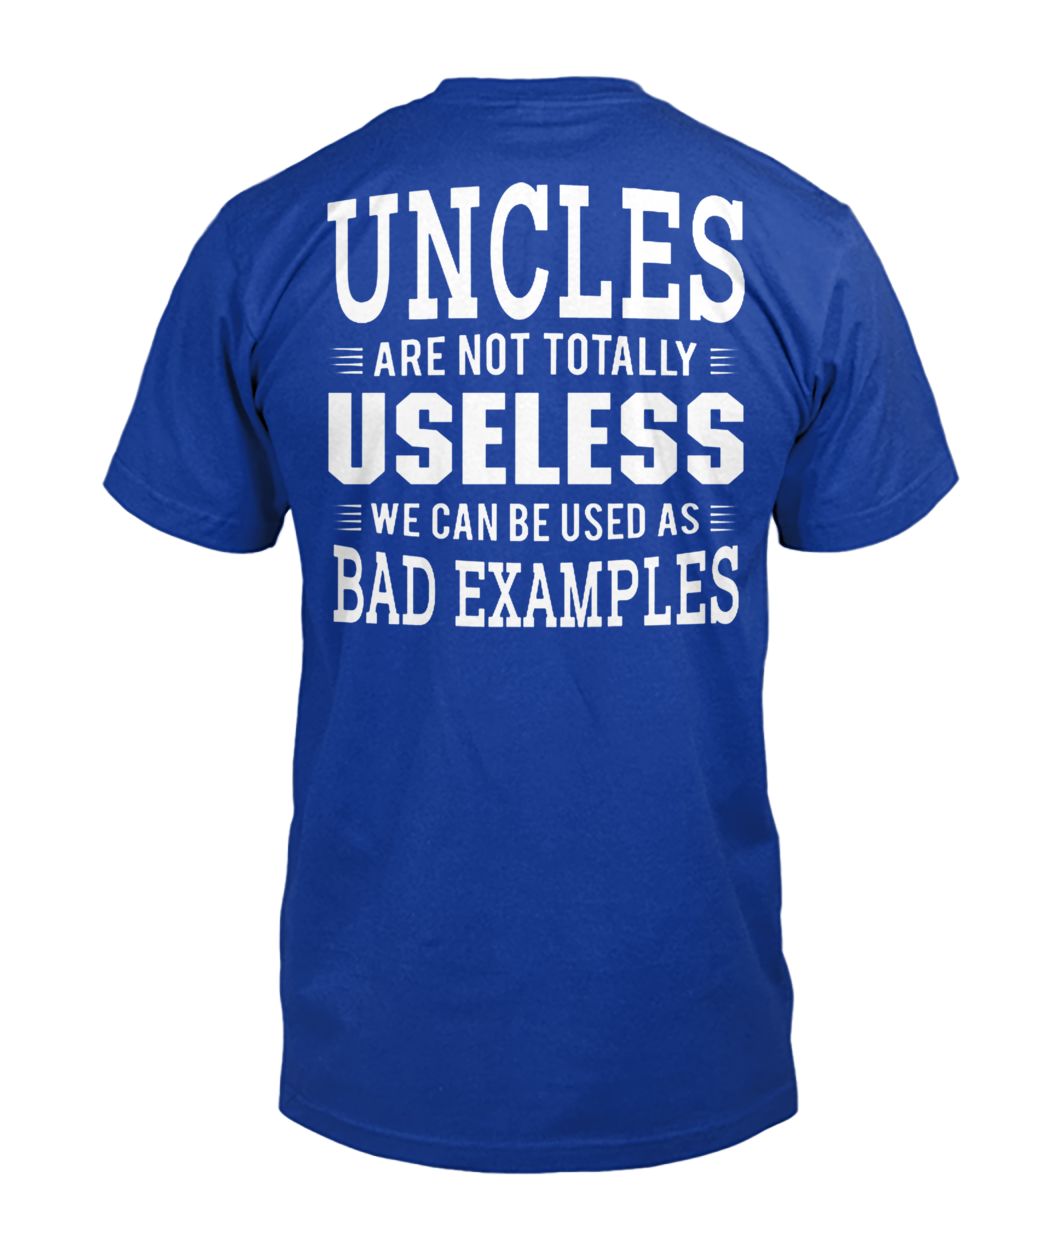 Uncles are not totally useless we can be used as bad example mens v-neck